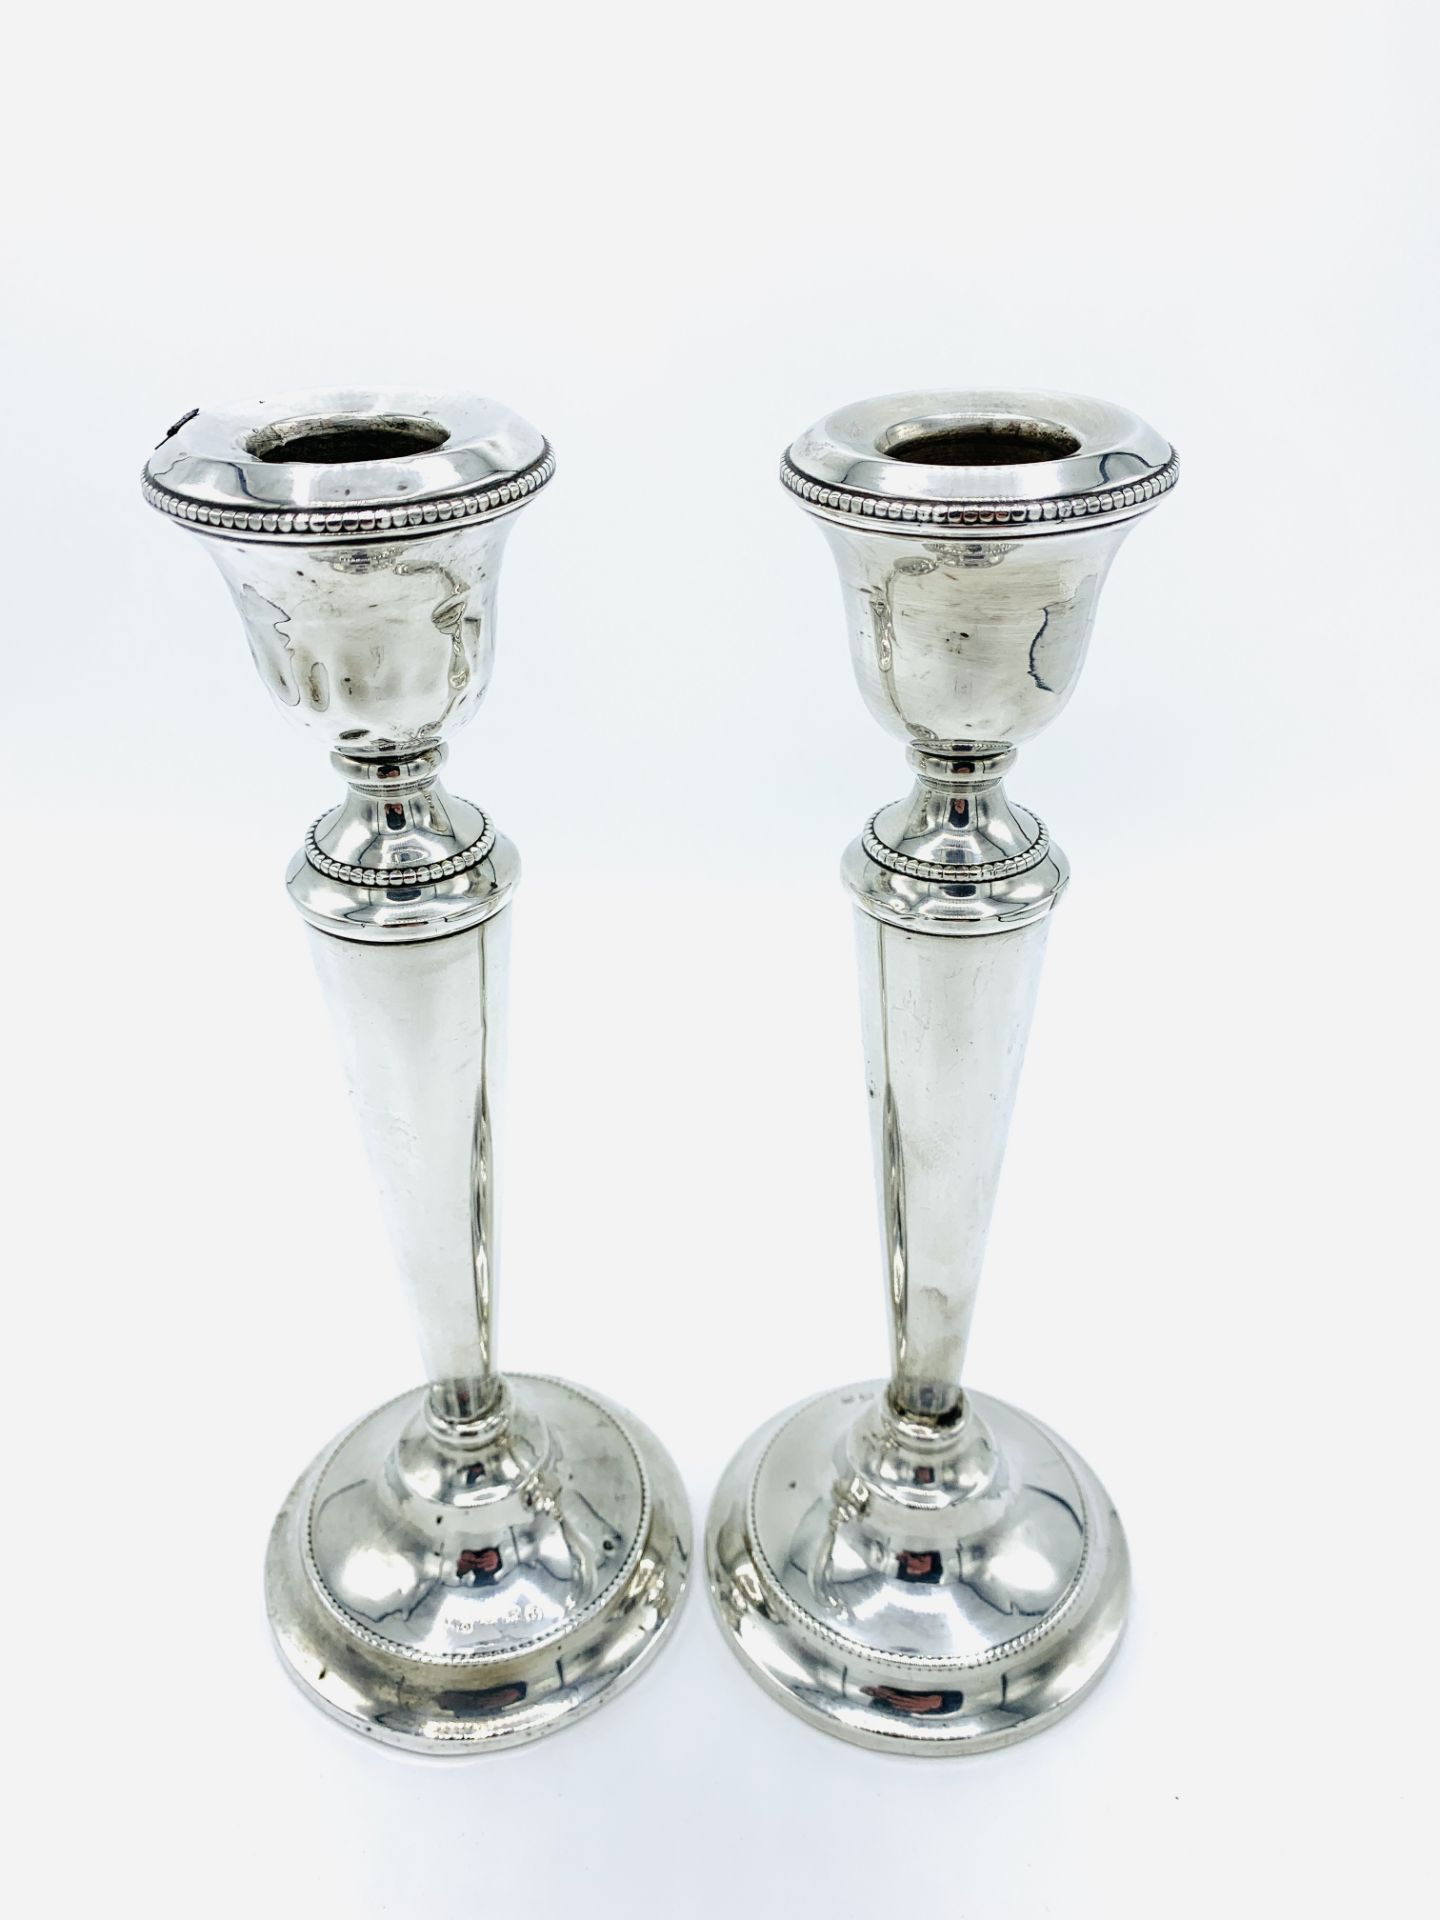 Pair of silver candlesticks. - Image 2 of 4